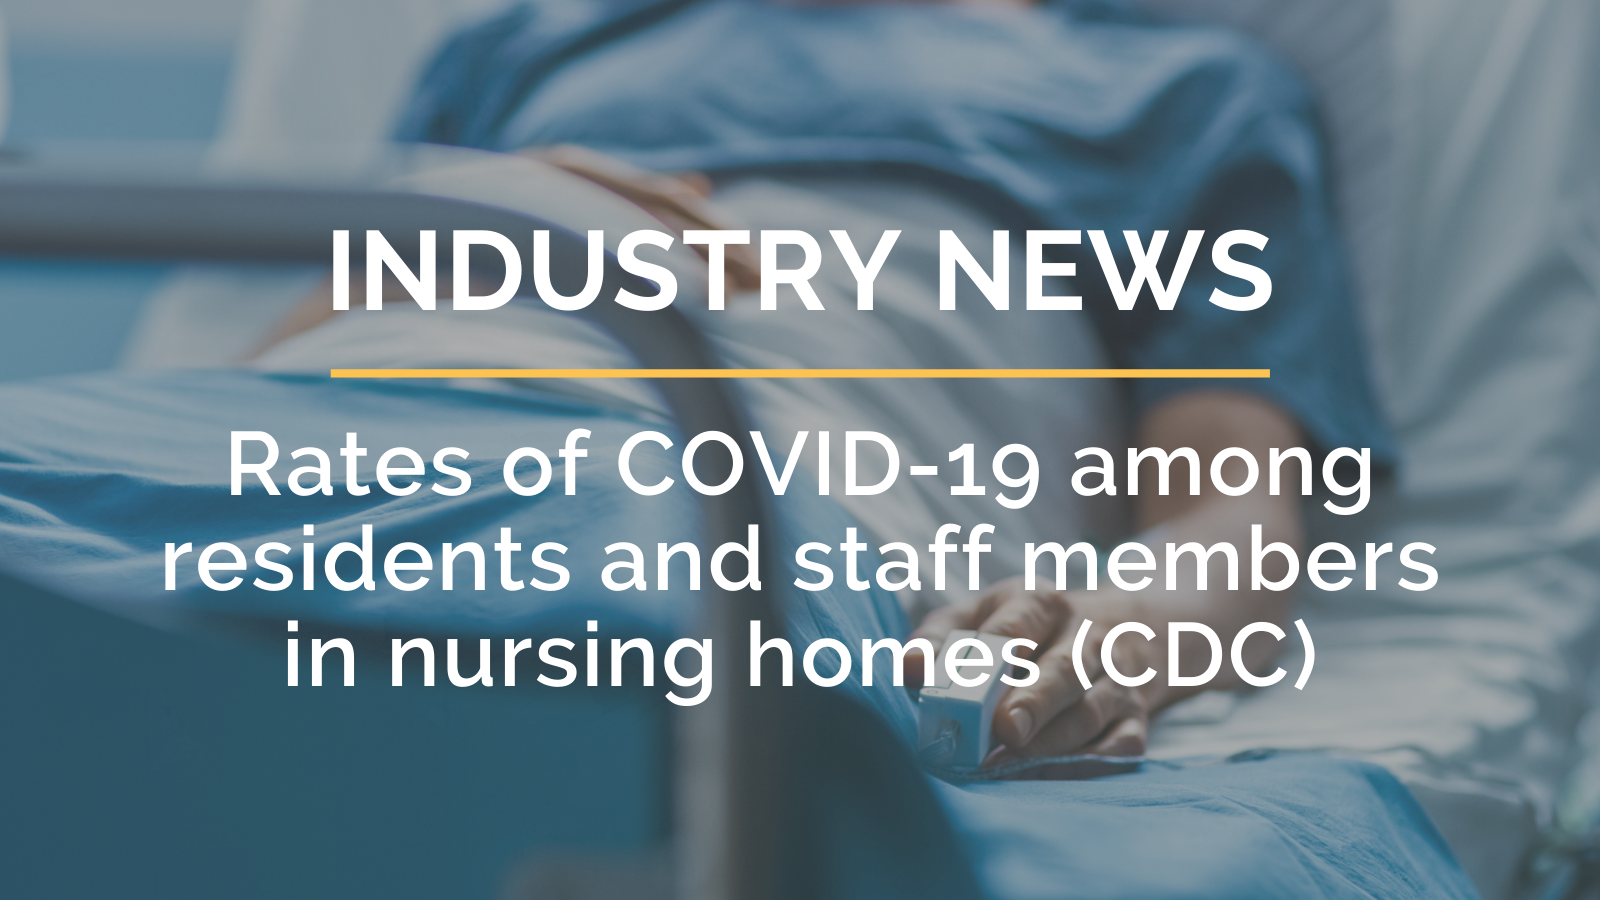 Rates of COVID19 among residents and staff members in nursing homes